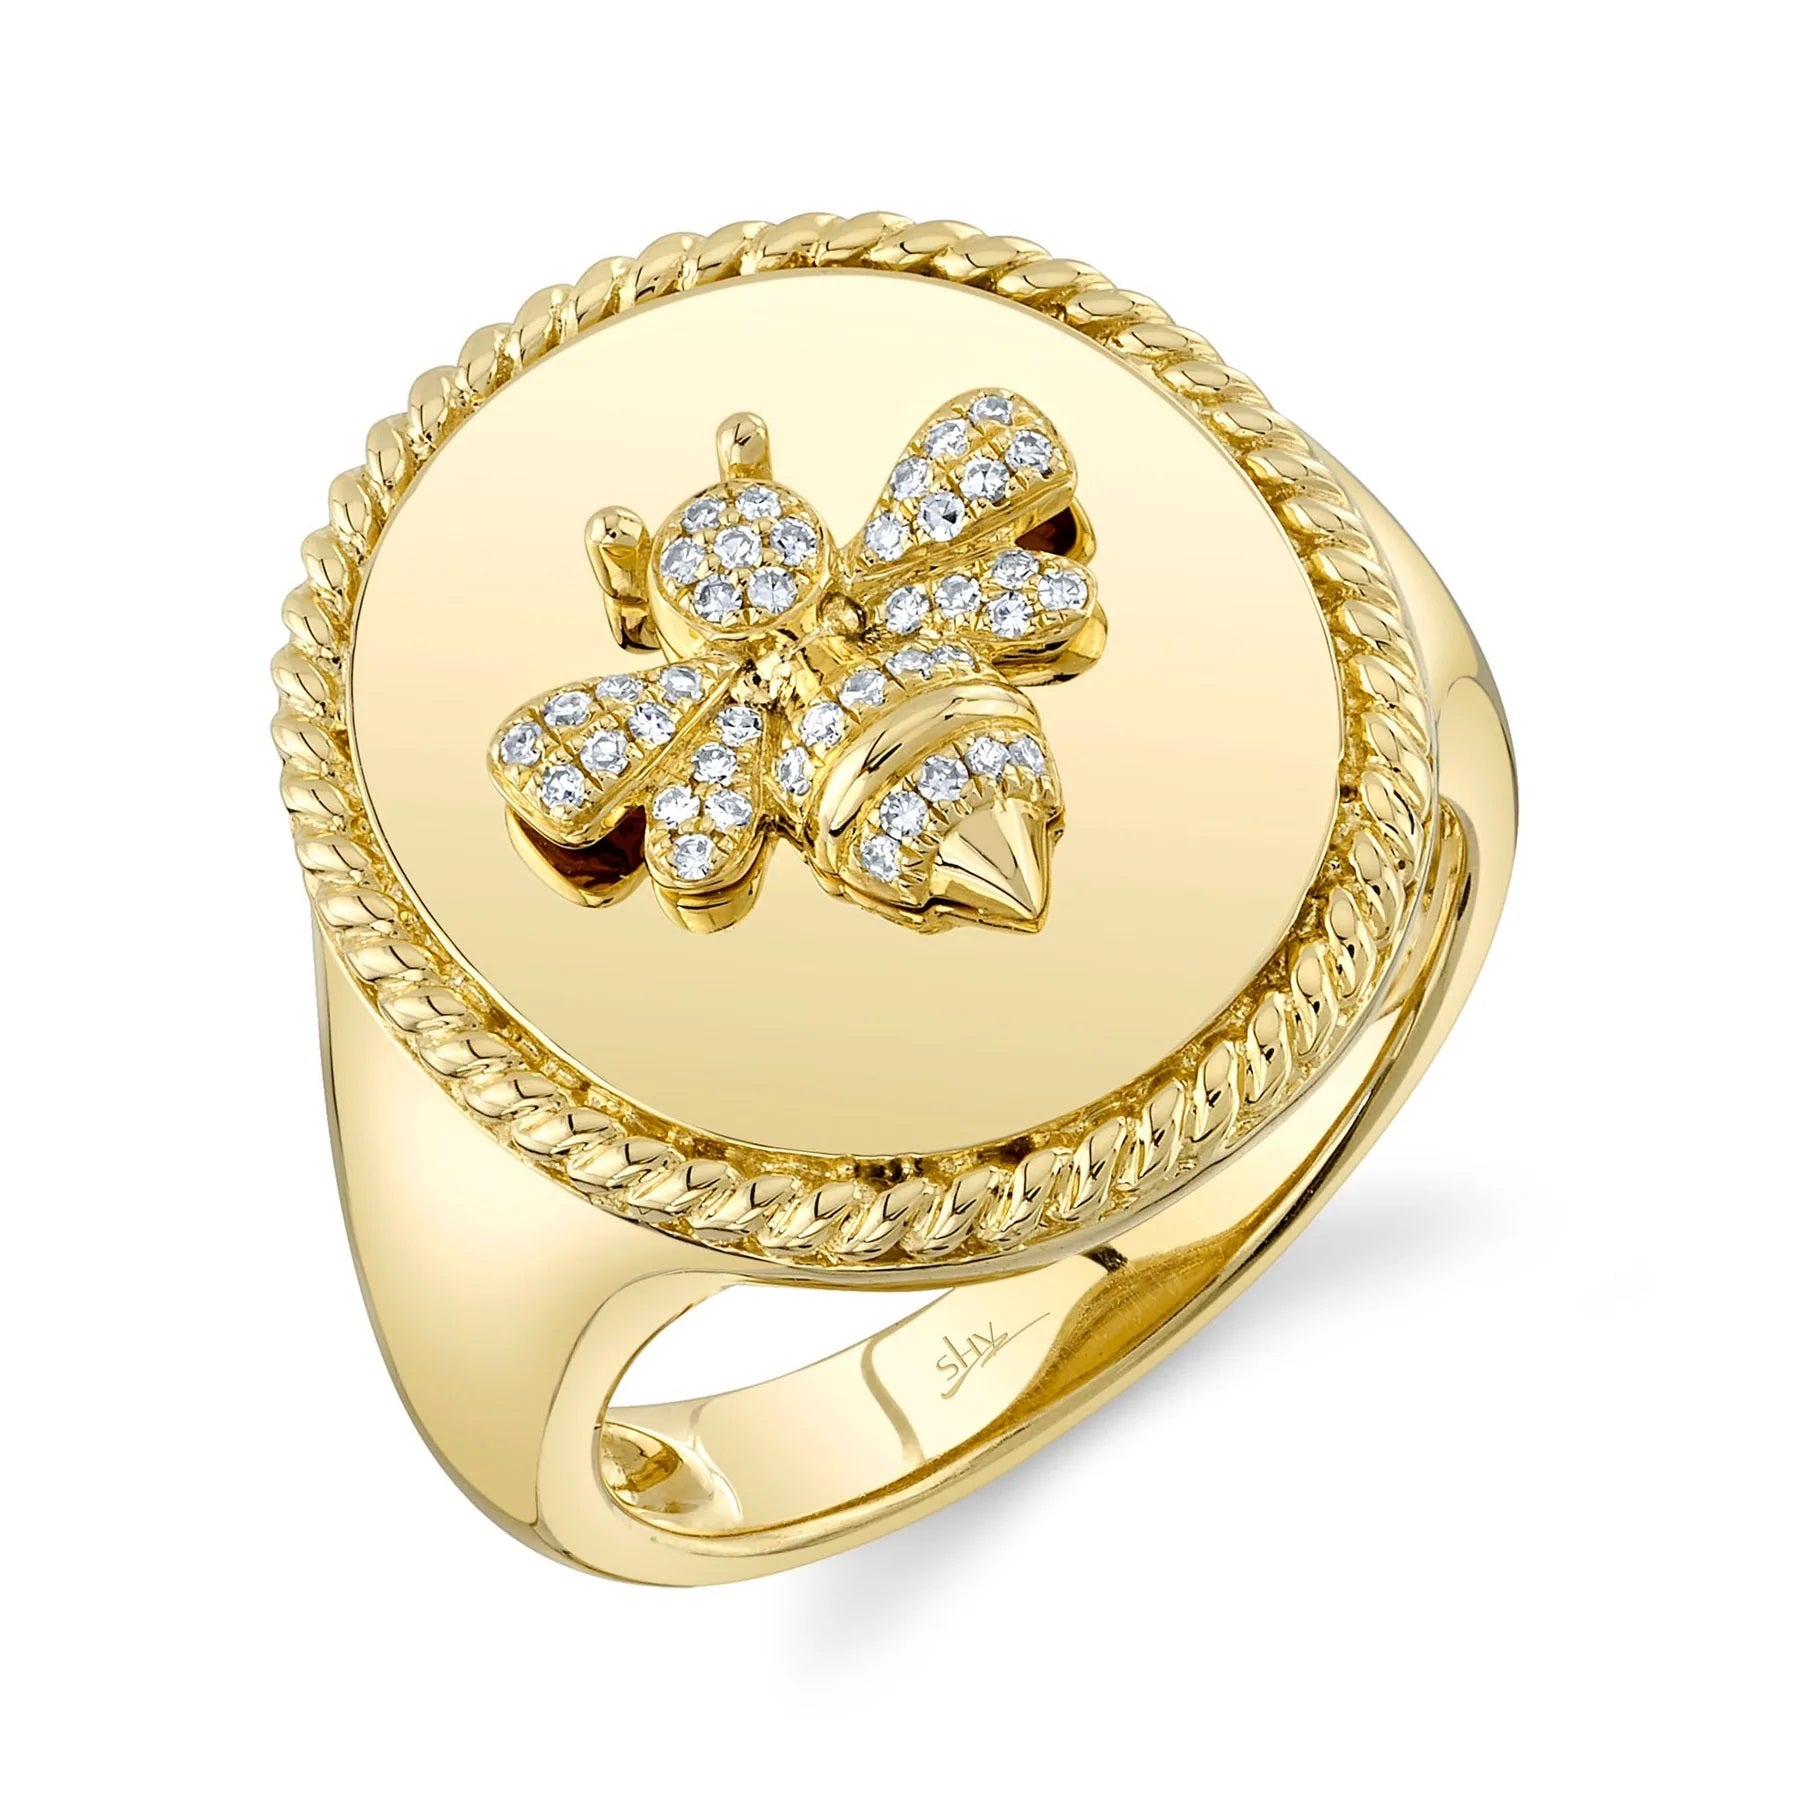 14K YELLOW GOLD AND DIAMOND BEE SIGNET RING .09CT